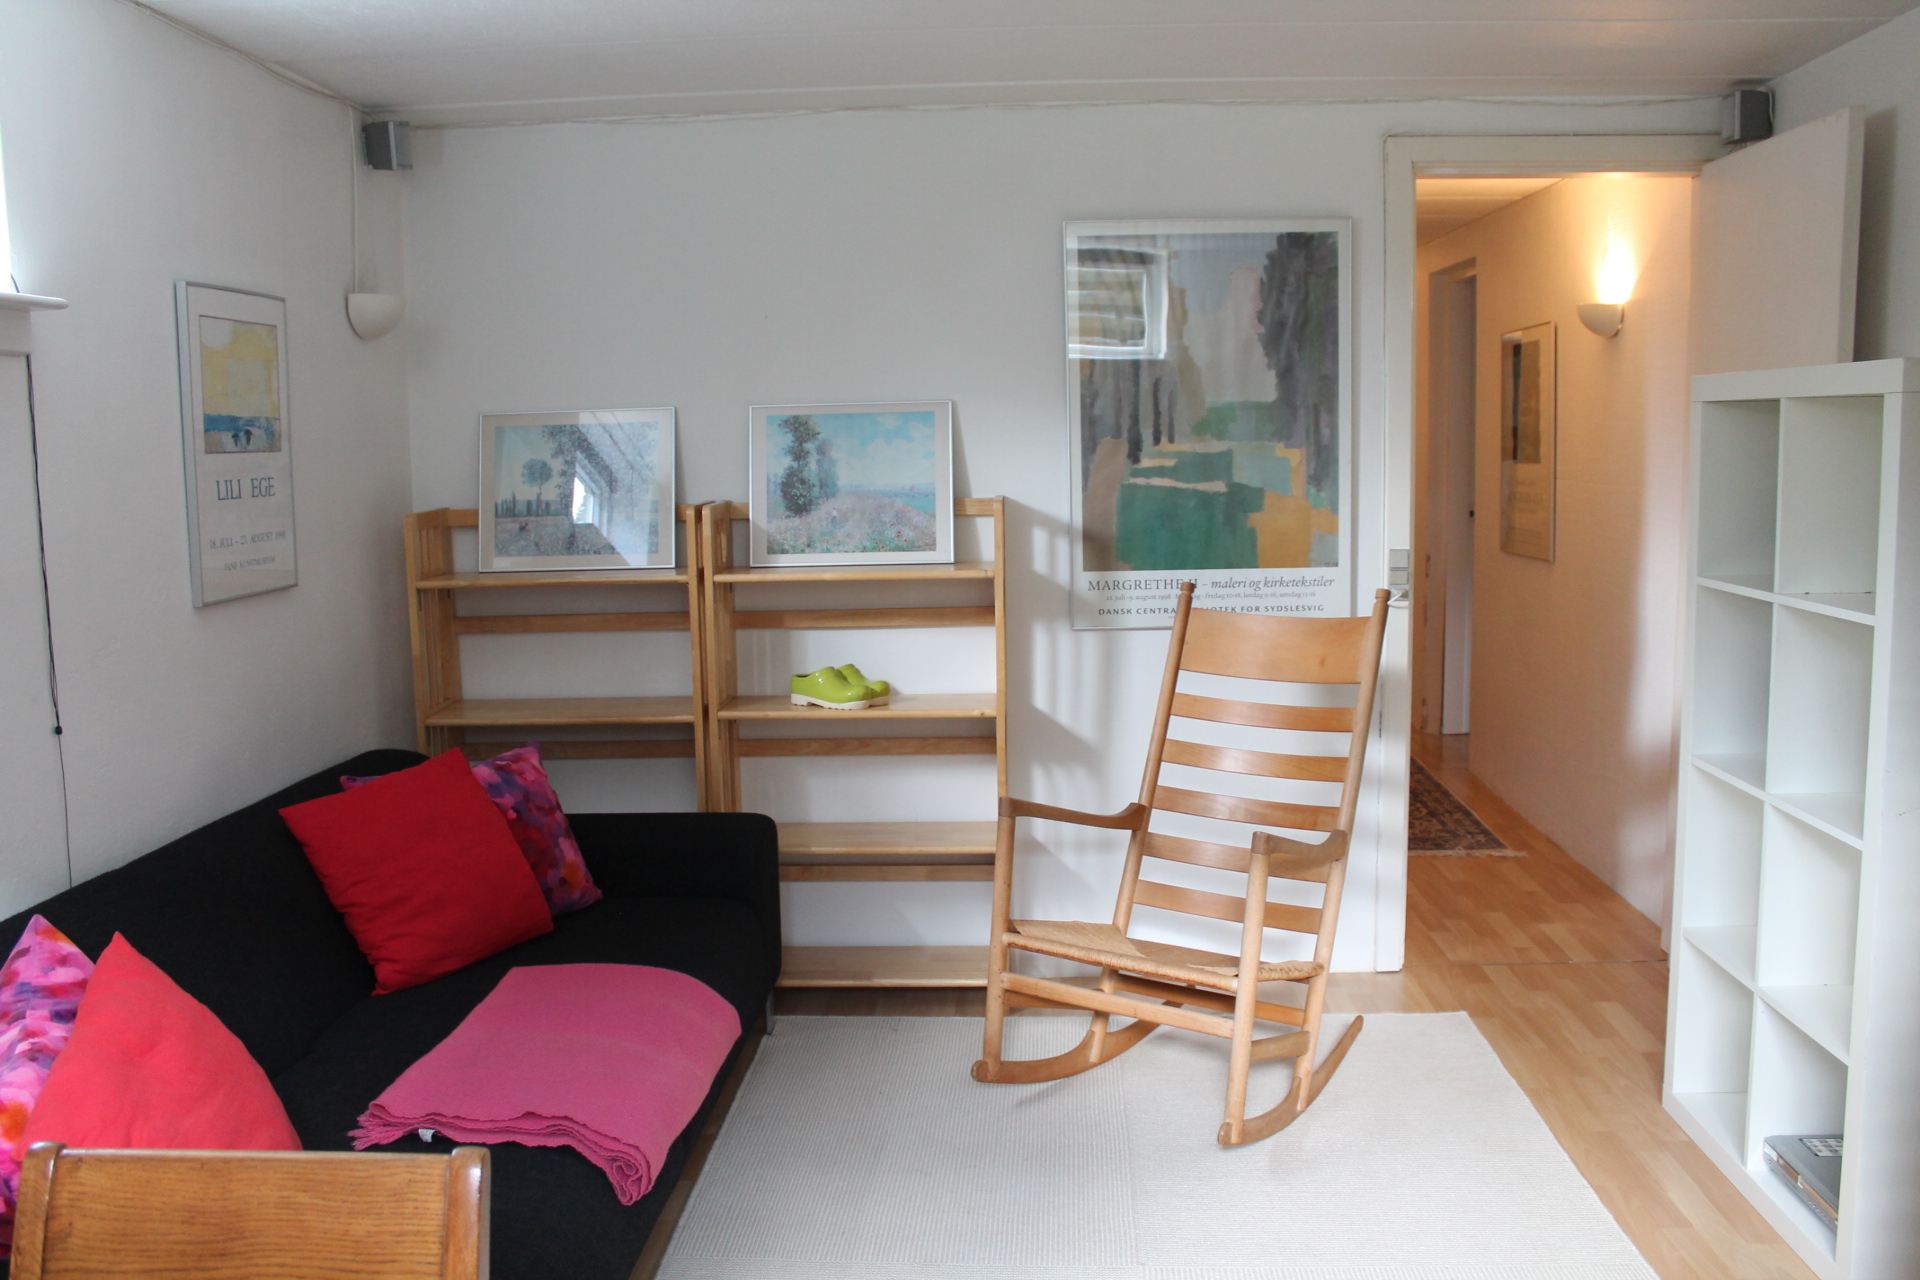 Room close to Roskilde and Køge. - Houses for Rent in Havdrup, Solrød,  Denmark